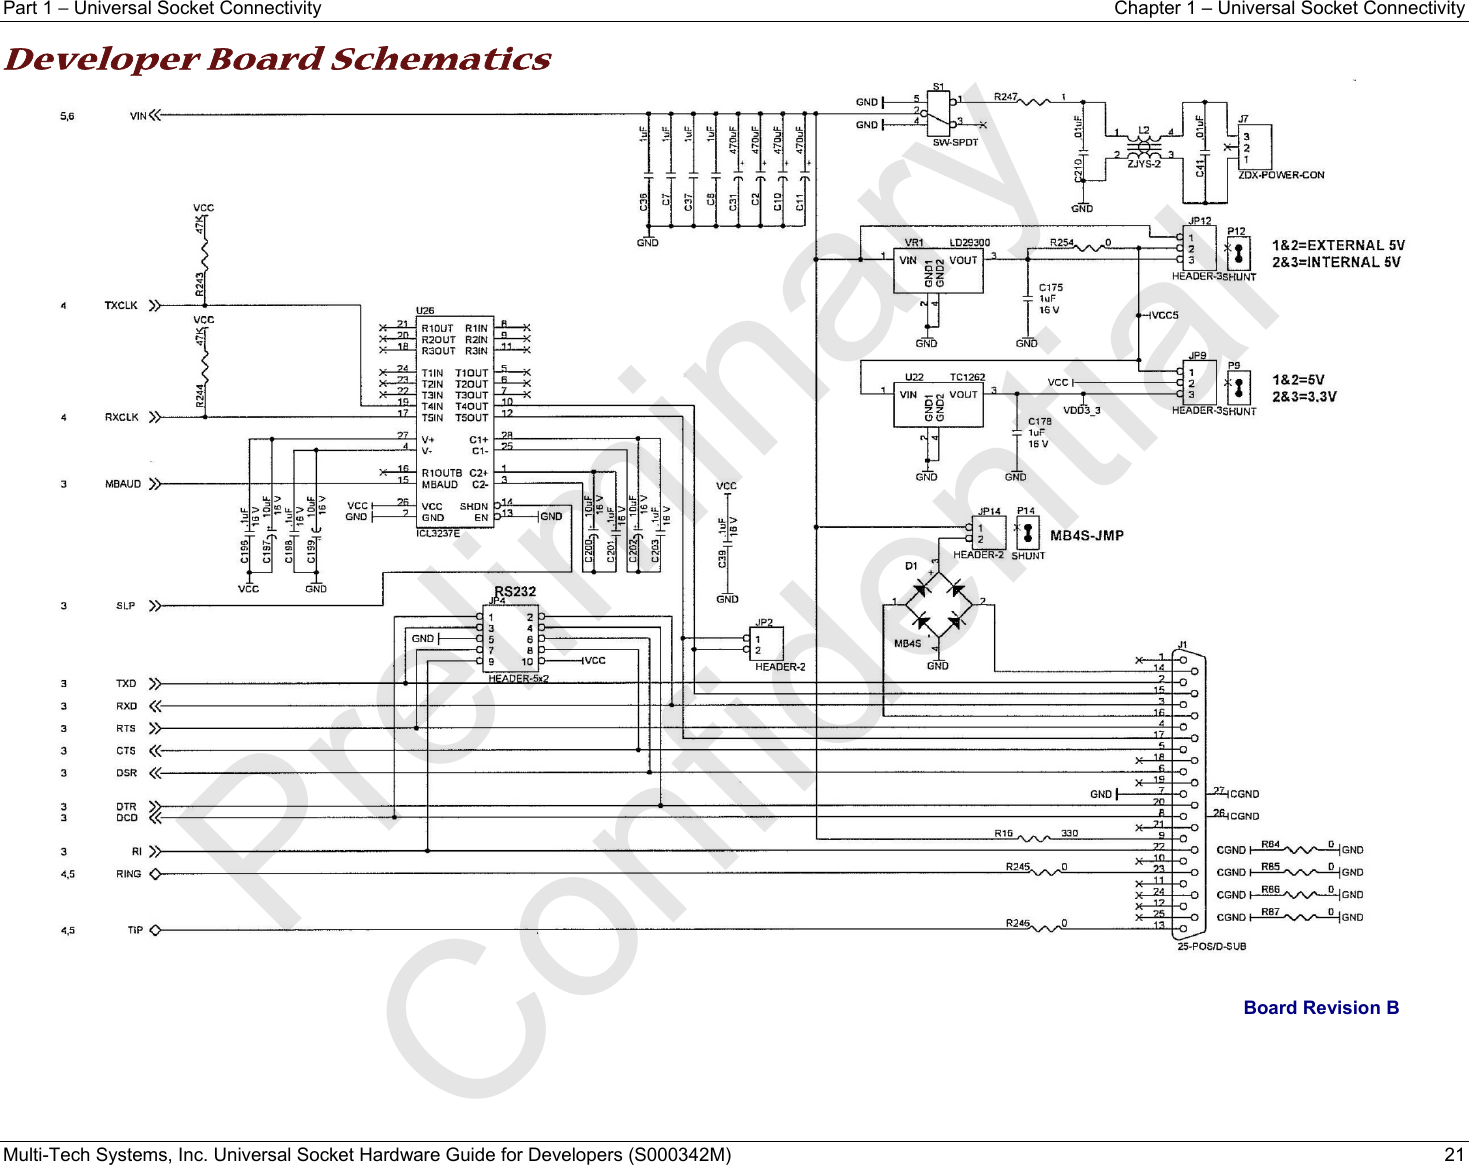 Part 1 − Universal Socket Connectivity  Chapter 1 – Universal Socket Connectivity Multi-Tech Systems, Inc. Universal Socket Hardware Guide for Developers (S000342M)  21  Developer Board Schematics   Board Revision B    Preliminary  Confidential